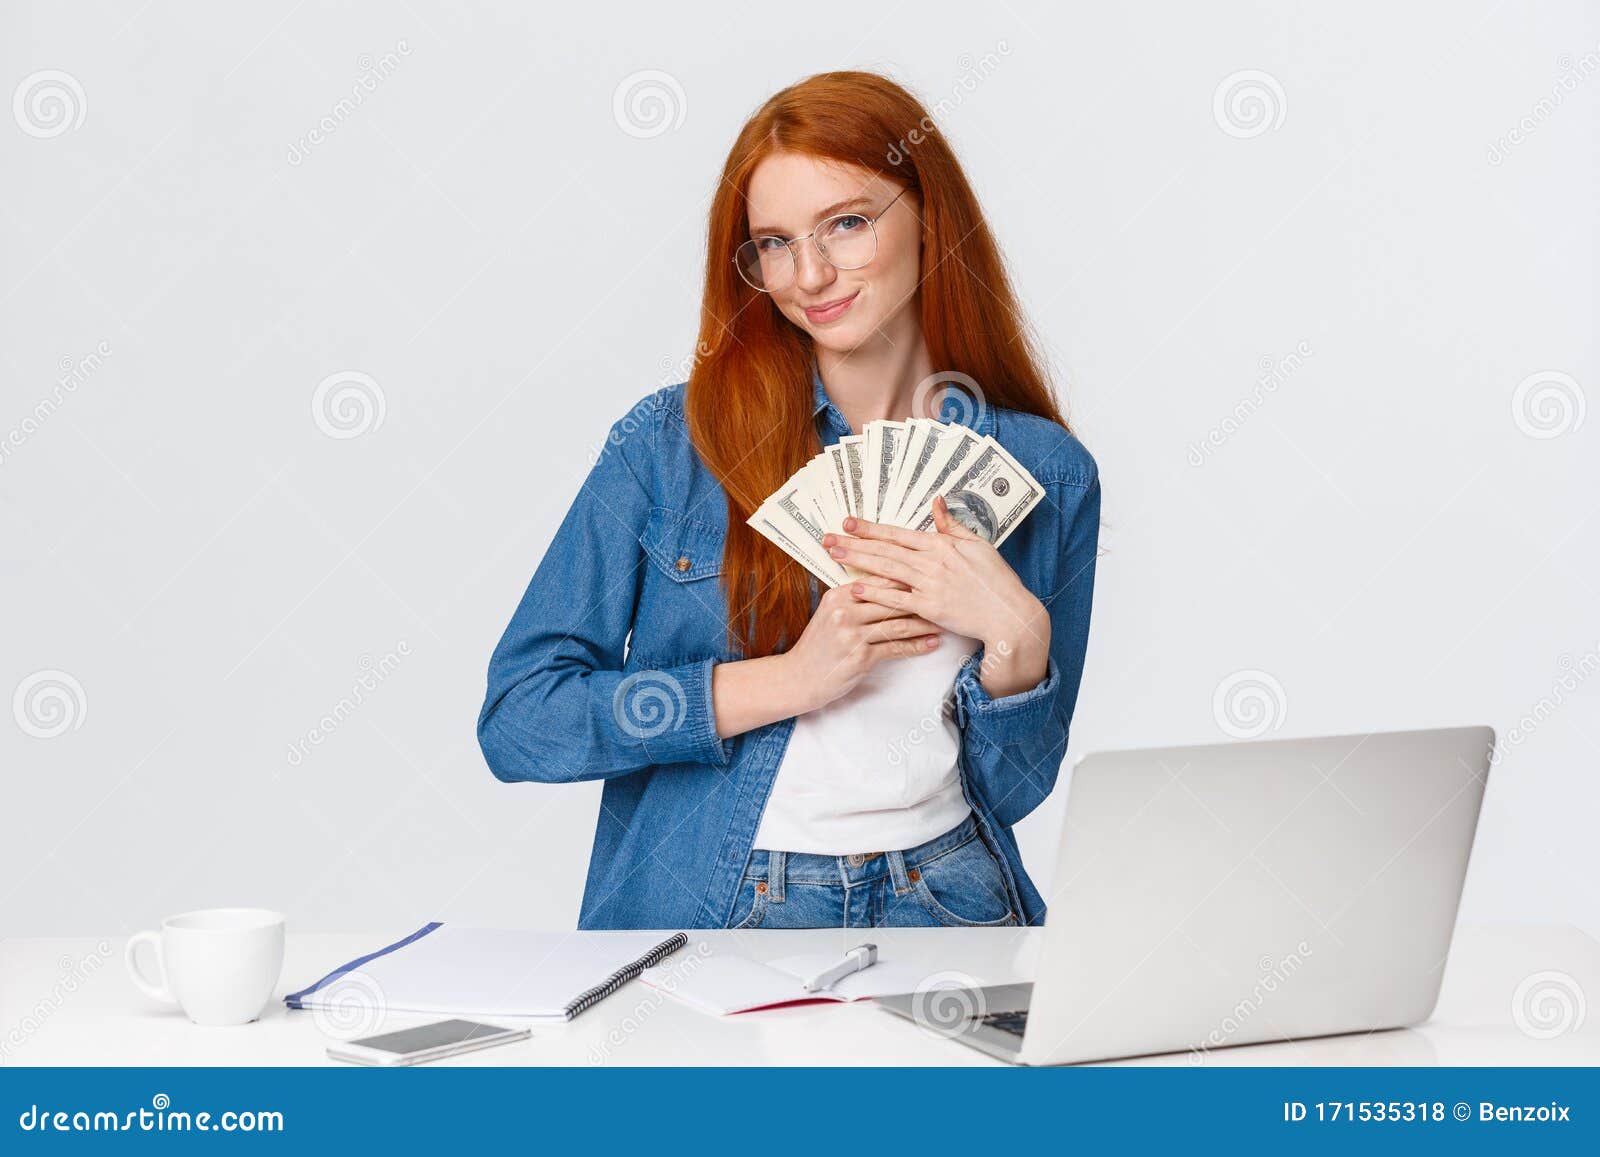 Girl Loves Money Feeling Warmth Of Cash In Hands Standing Silly And Delighted Received